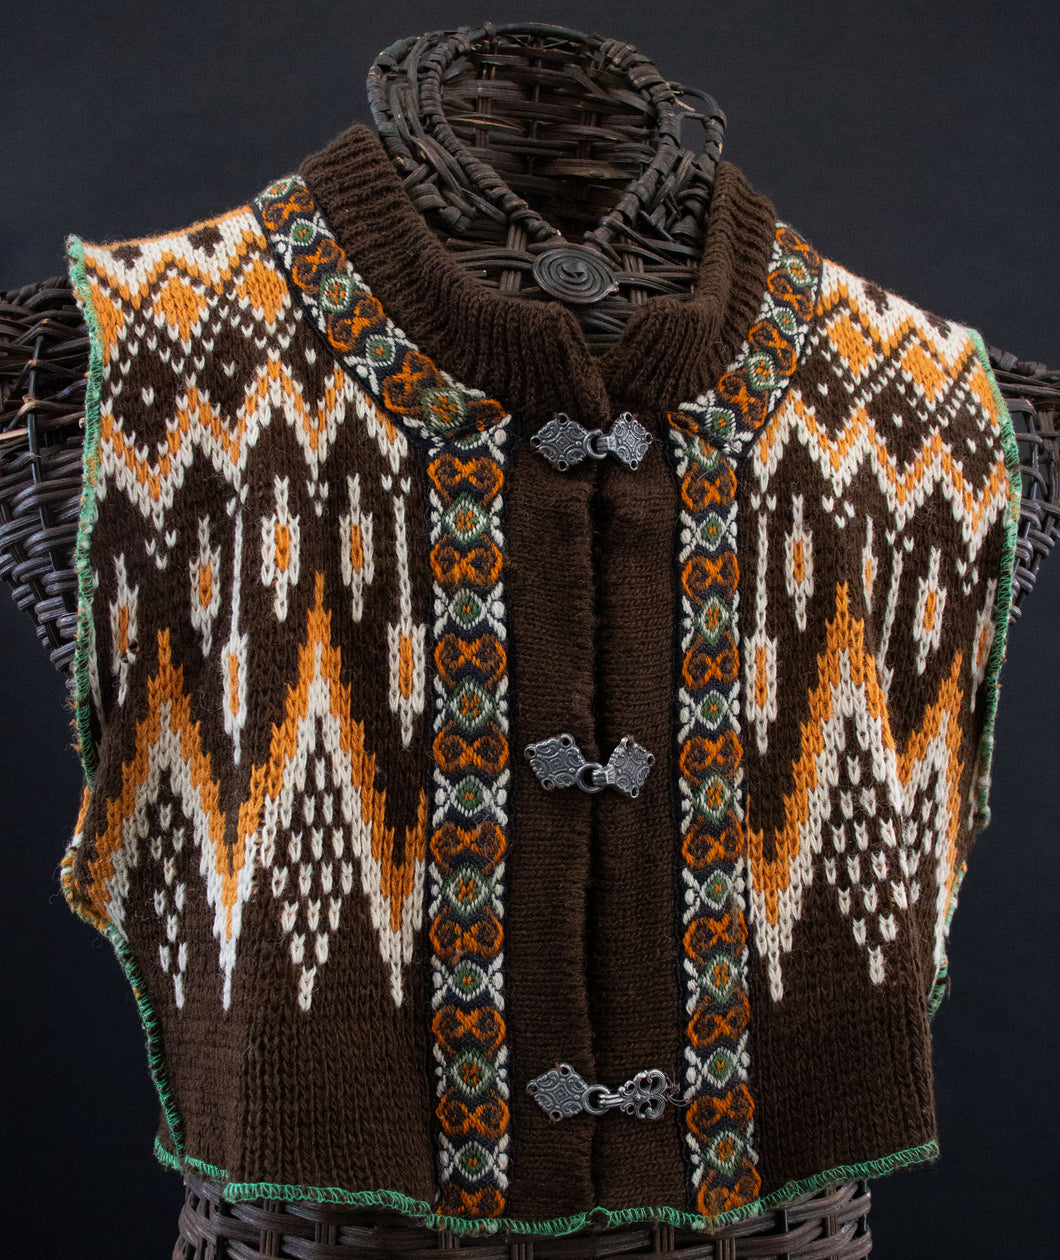 Front view of bolero sweater showing metal closures